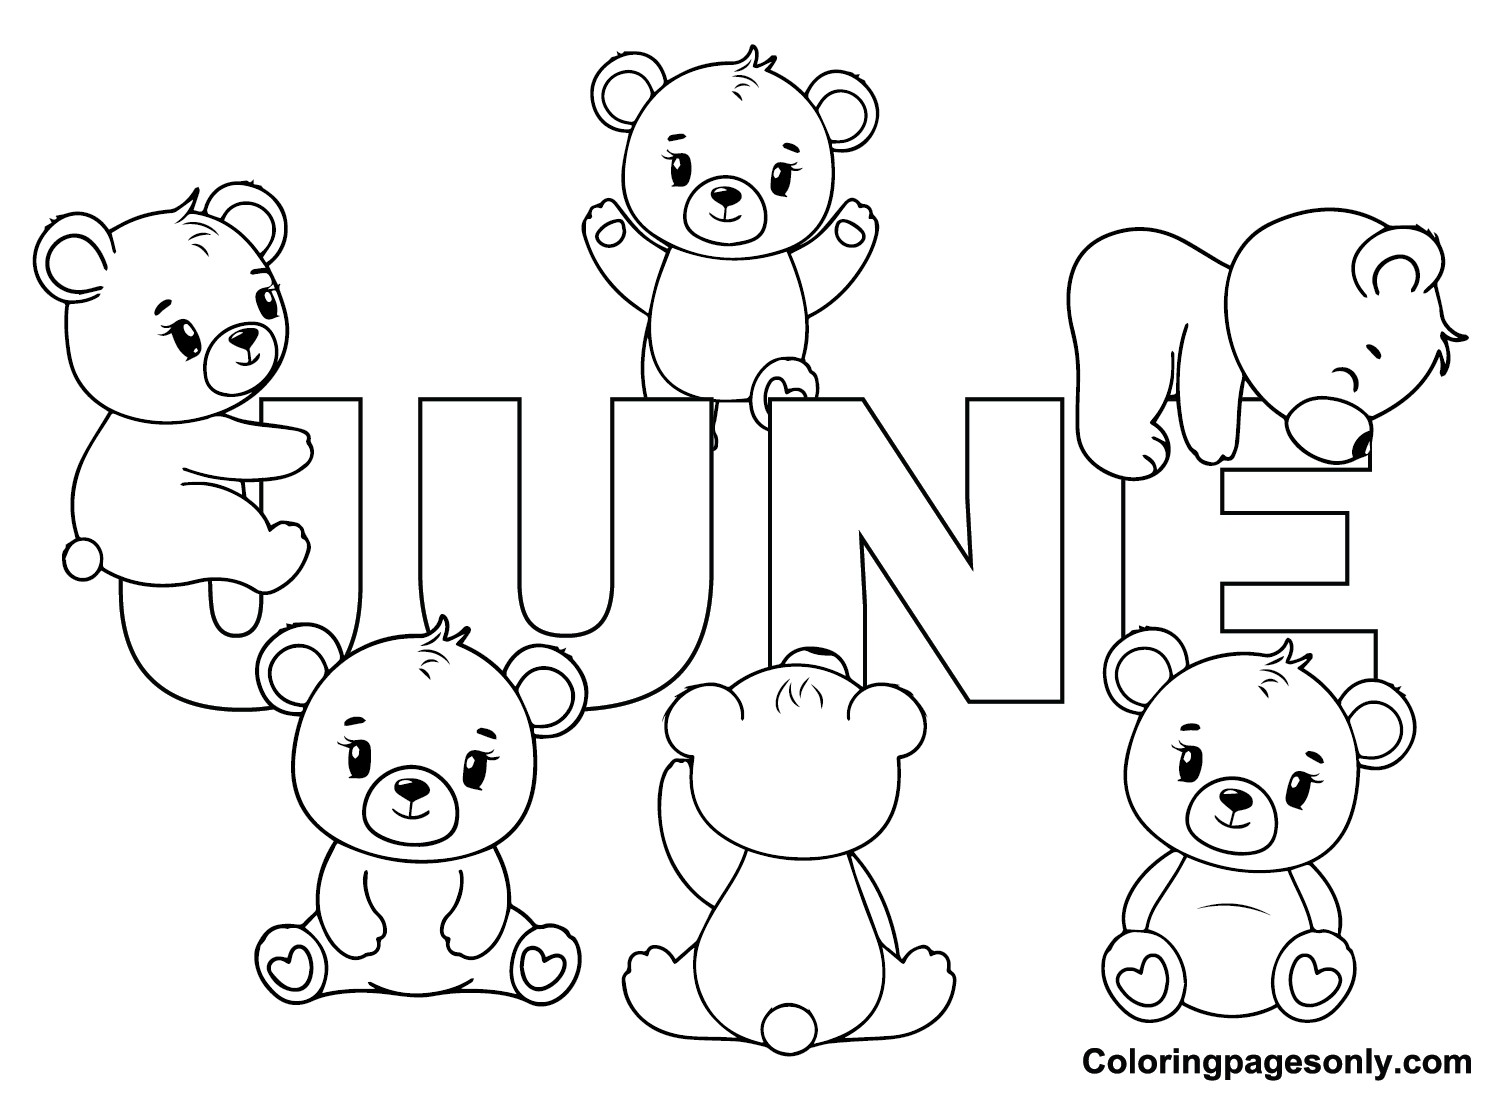 June Images Coloring Page